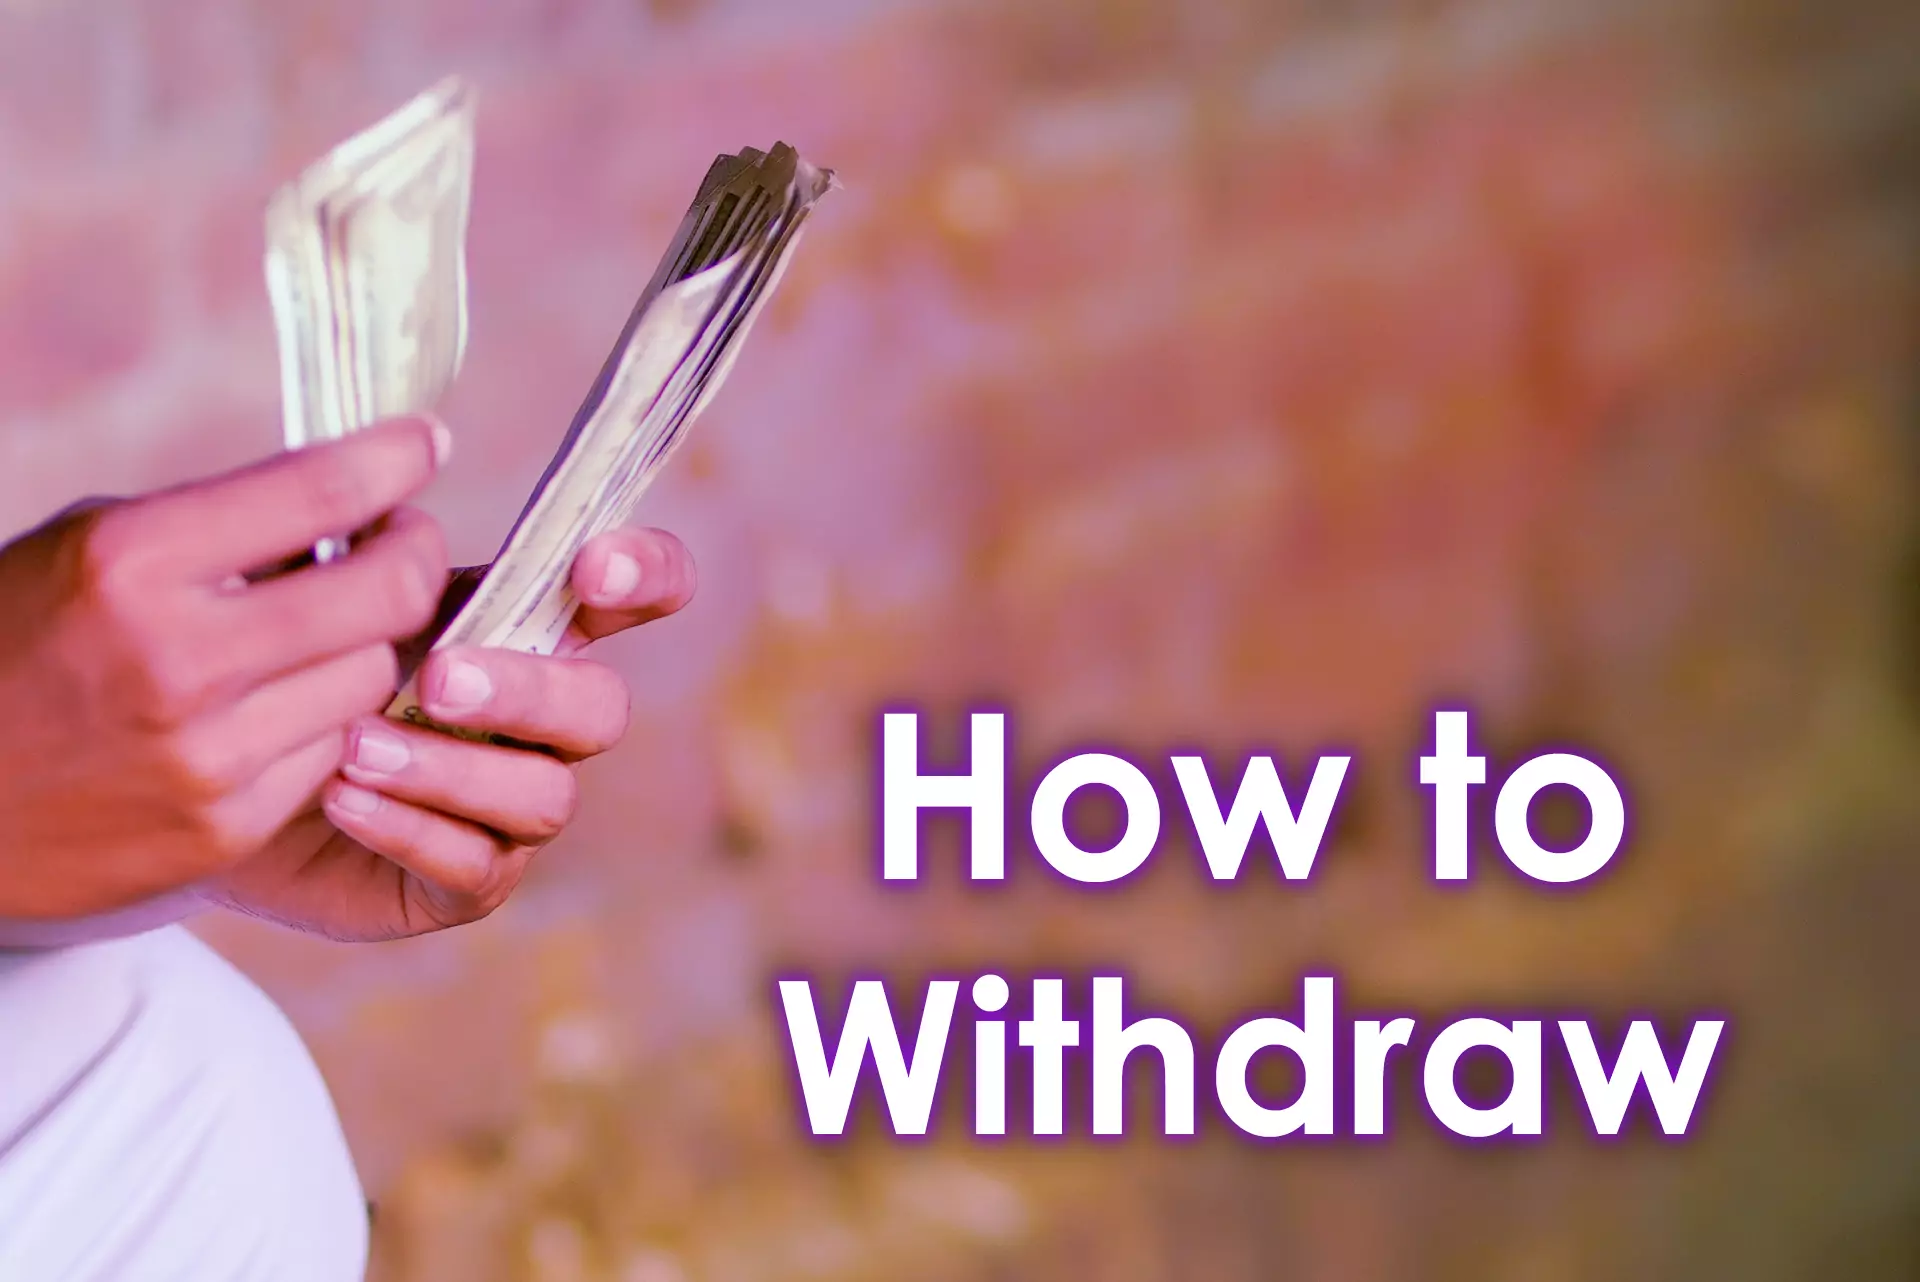 To withdraw, you have to choose a payment system and amount.